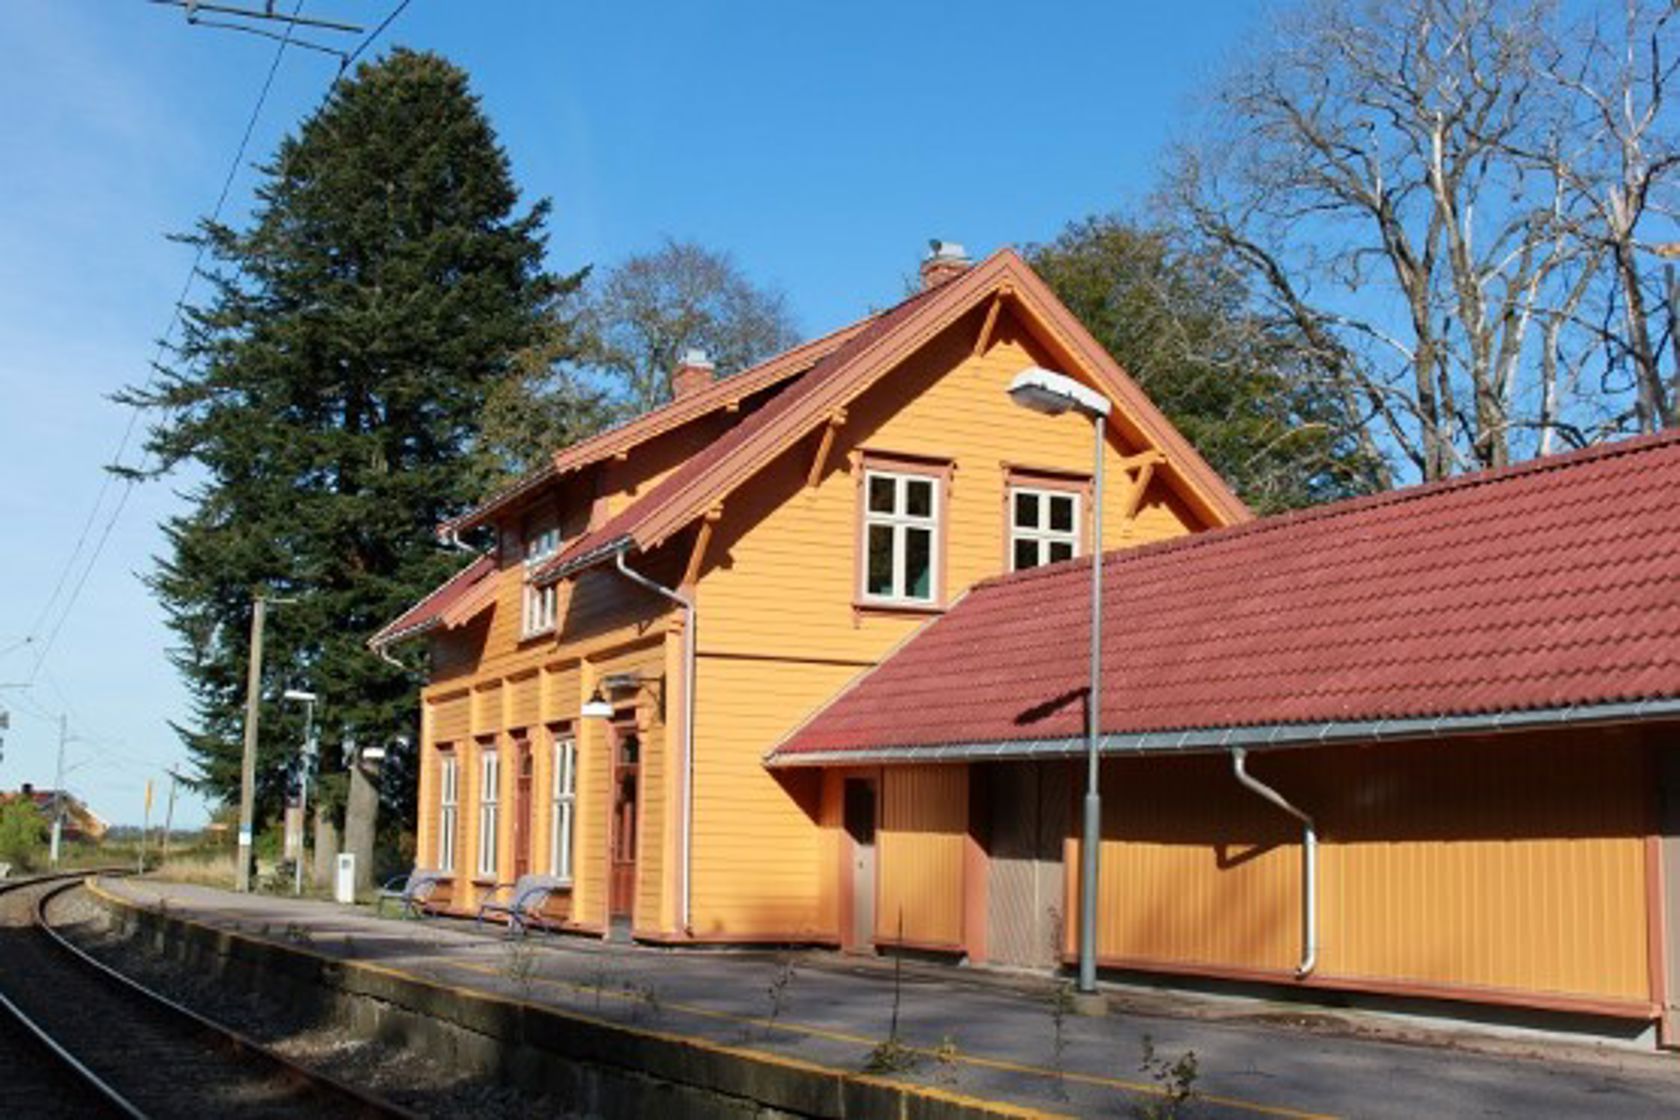 Exterior view of Eidsberg station